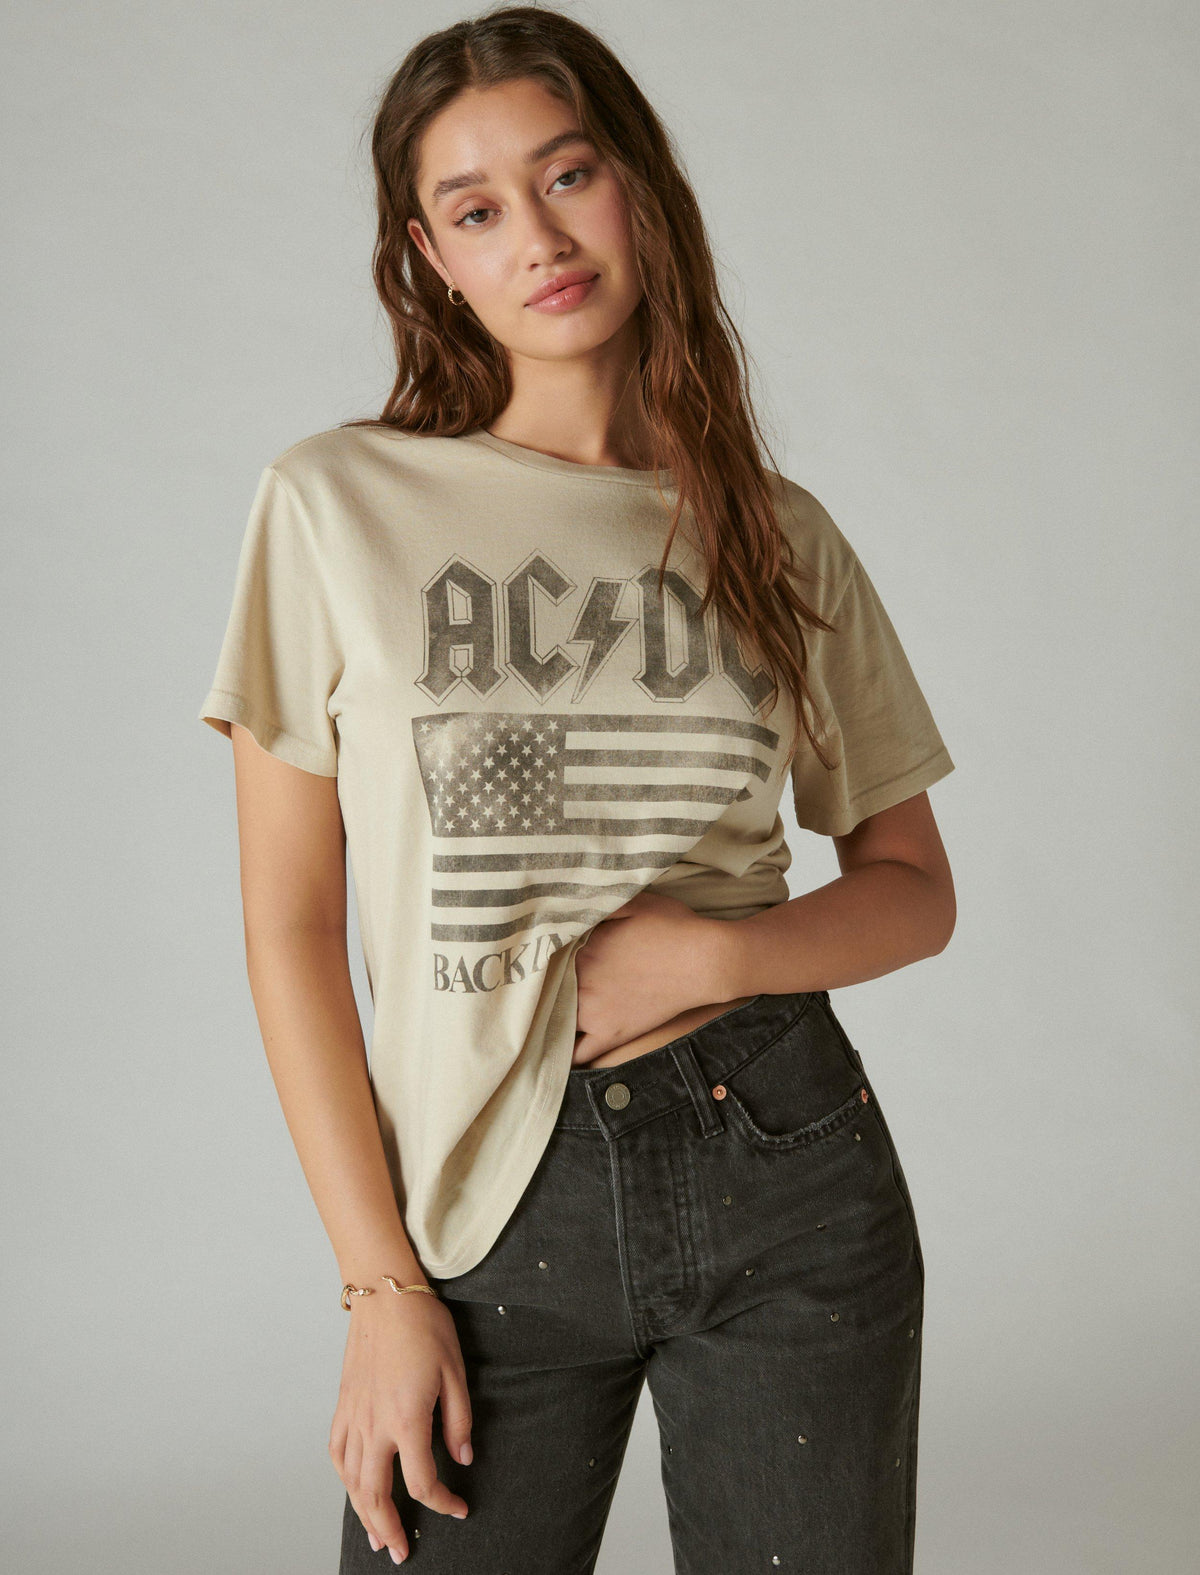 Lucky Brand Back In Back Acdc Boyfriend Tee - Women's Clothing Tops Shirts Tee Graphic T Shirts Gray Morn